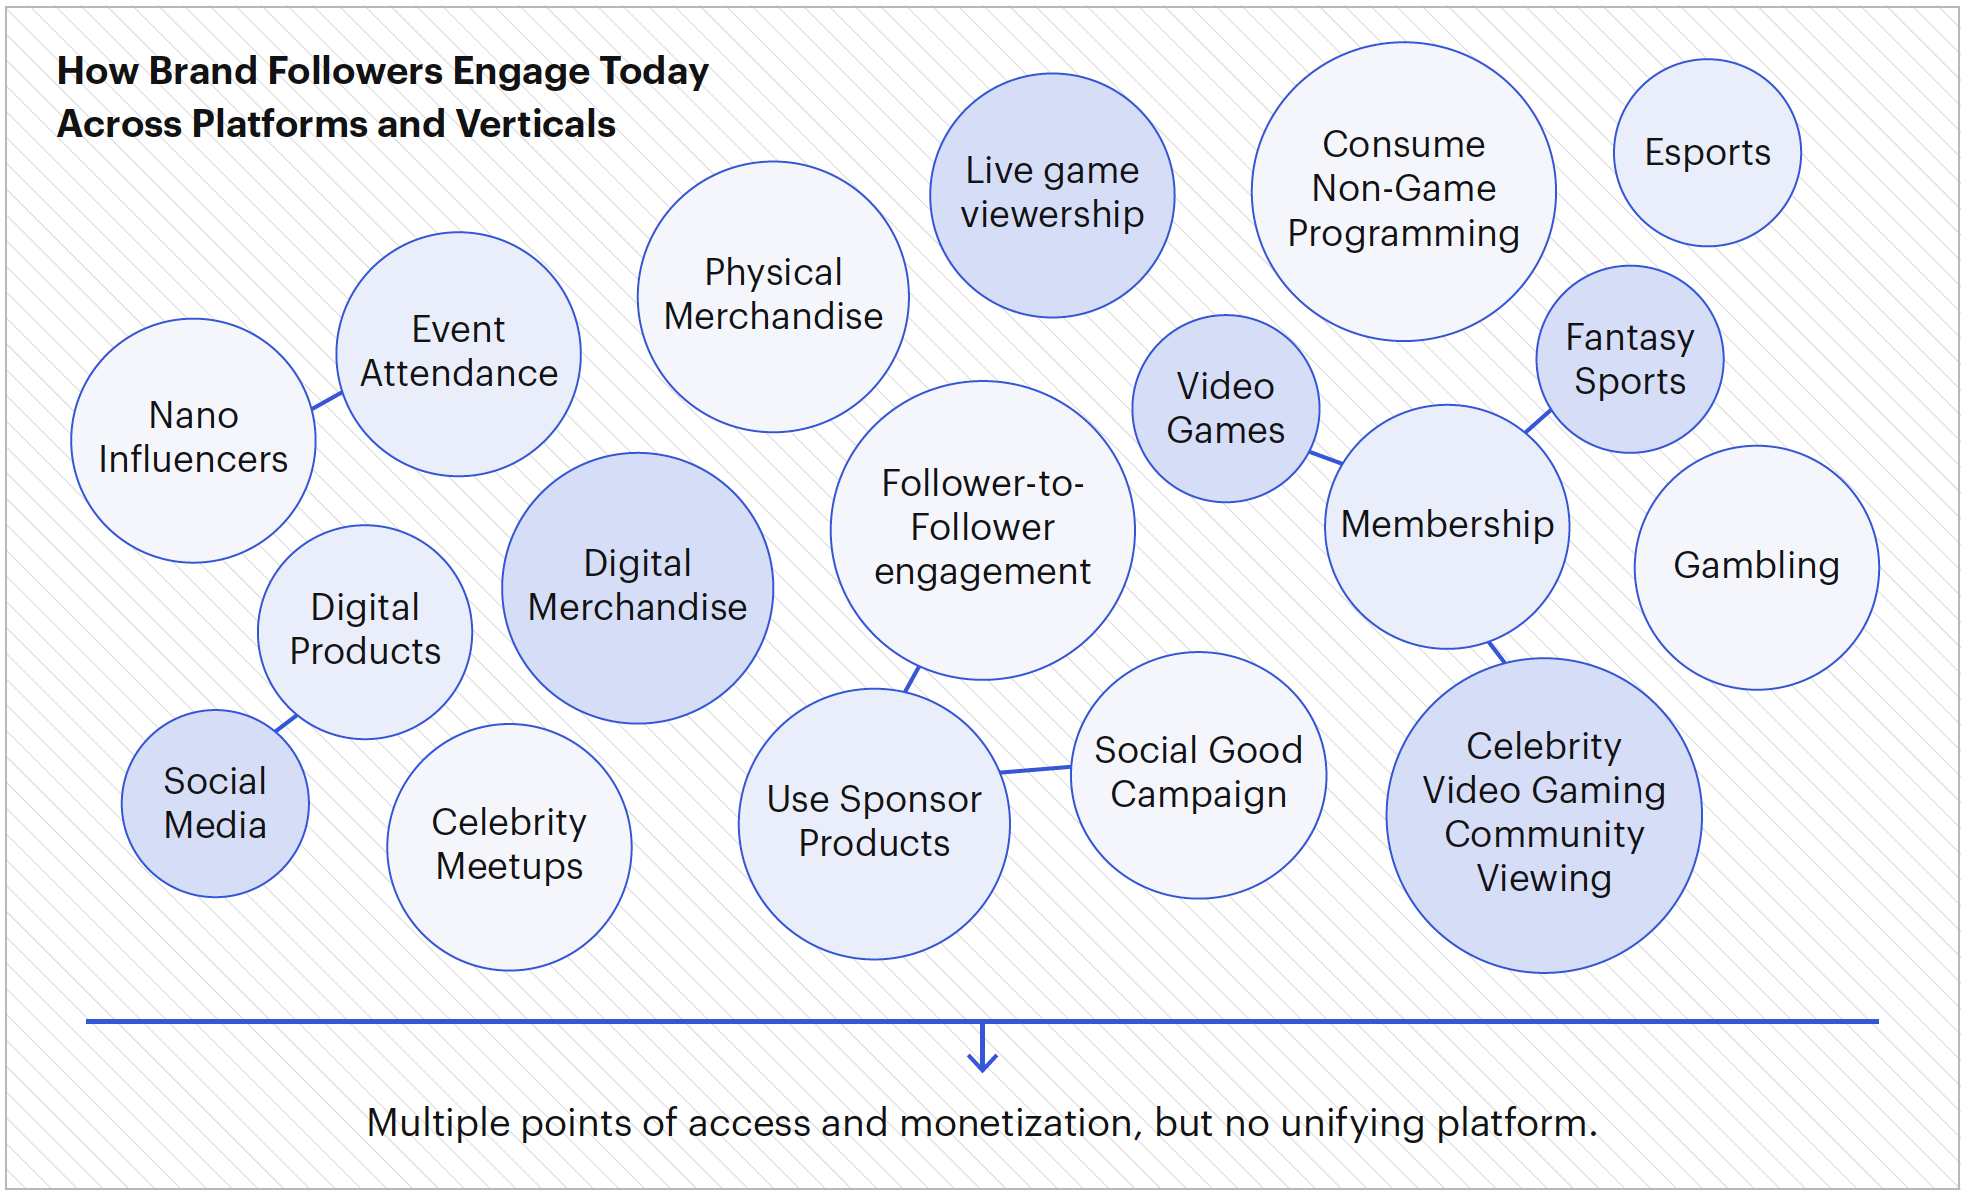 Figure 3: How Brand Followers Engage Today (ConsenSys, 2019)